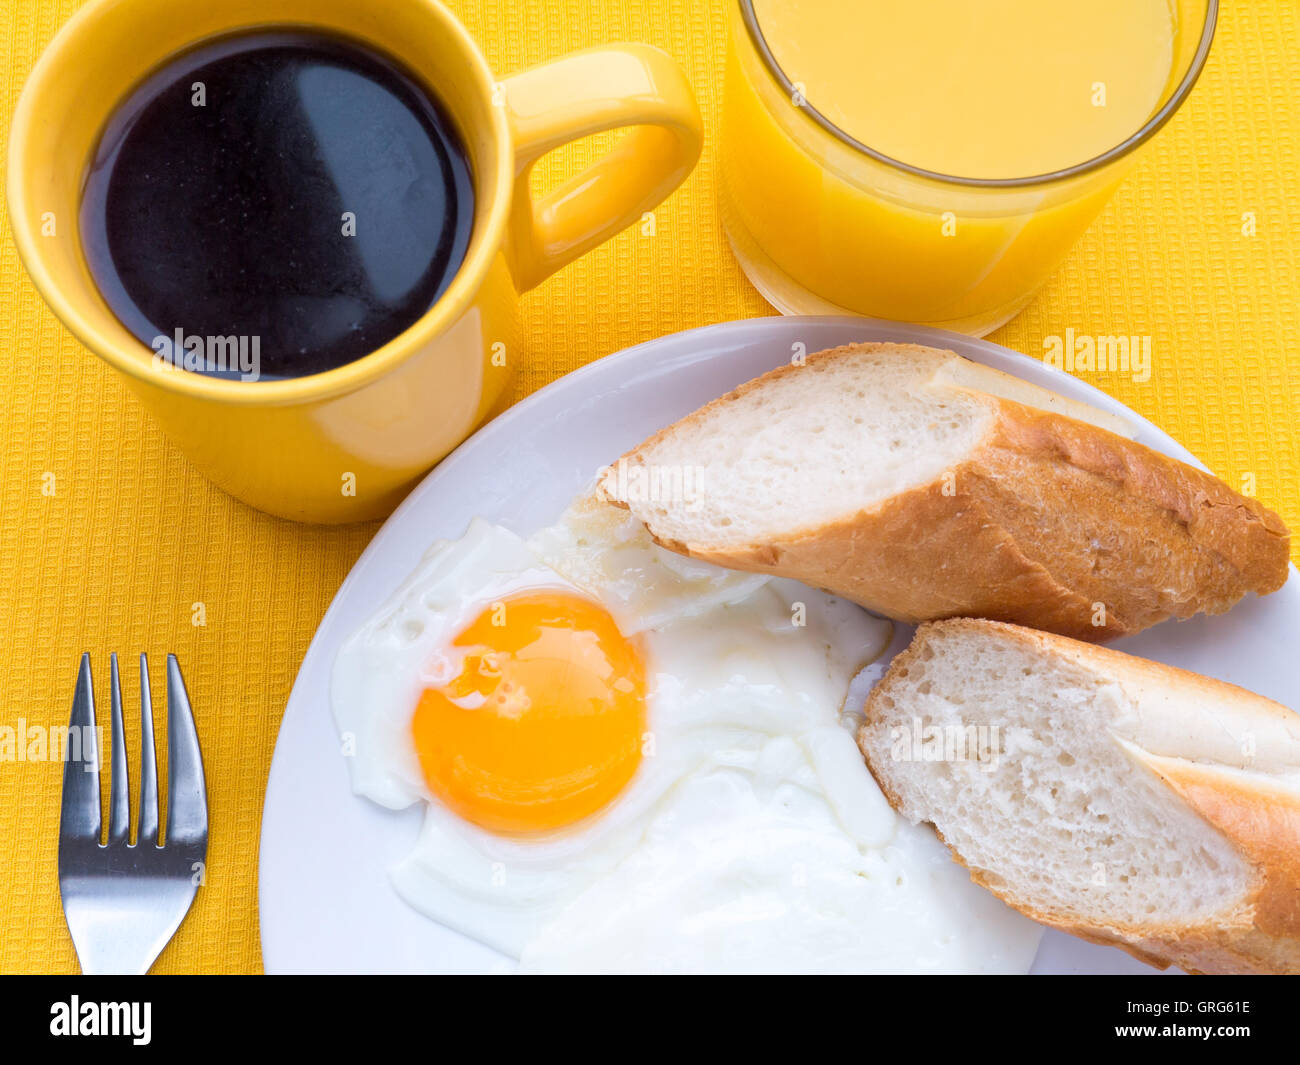 Fried eggs, coffee and orange juice breakfast on the yellow tablecloth top view Stock Photo